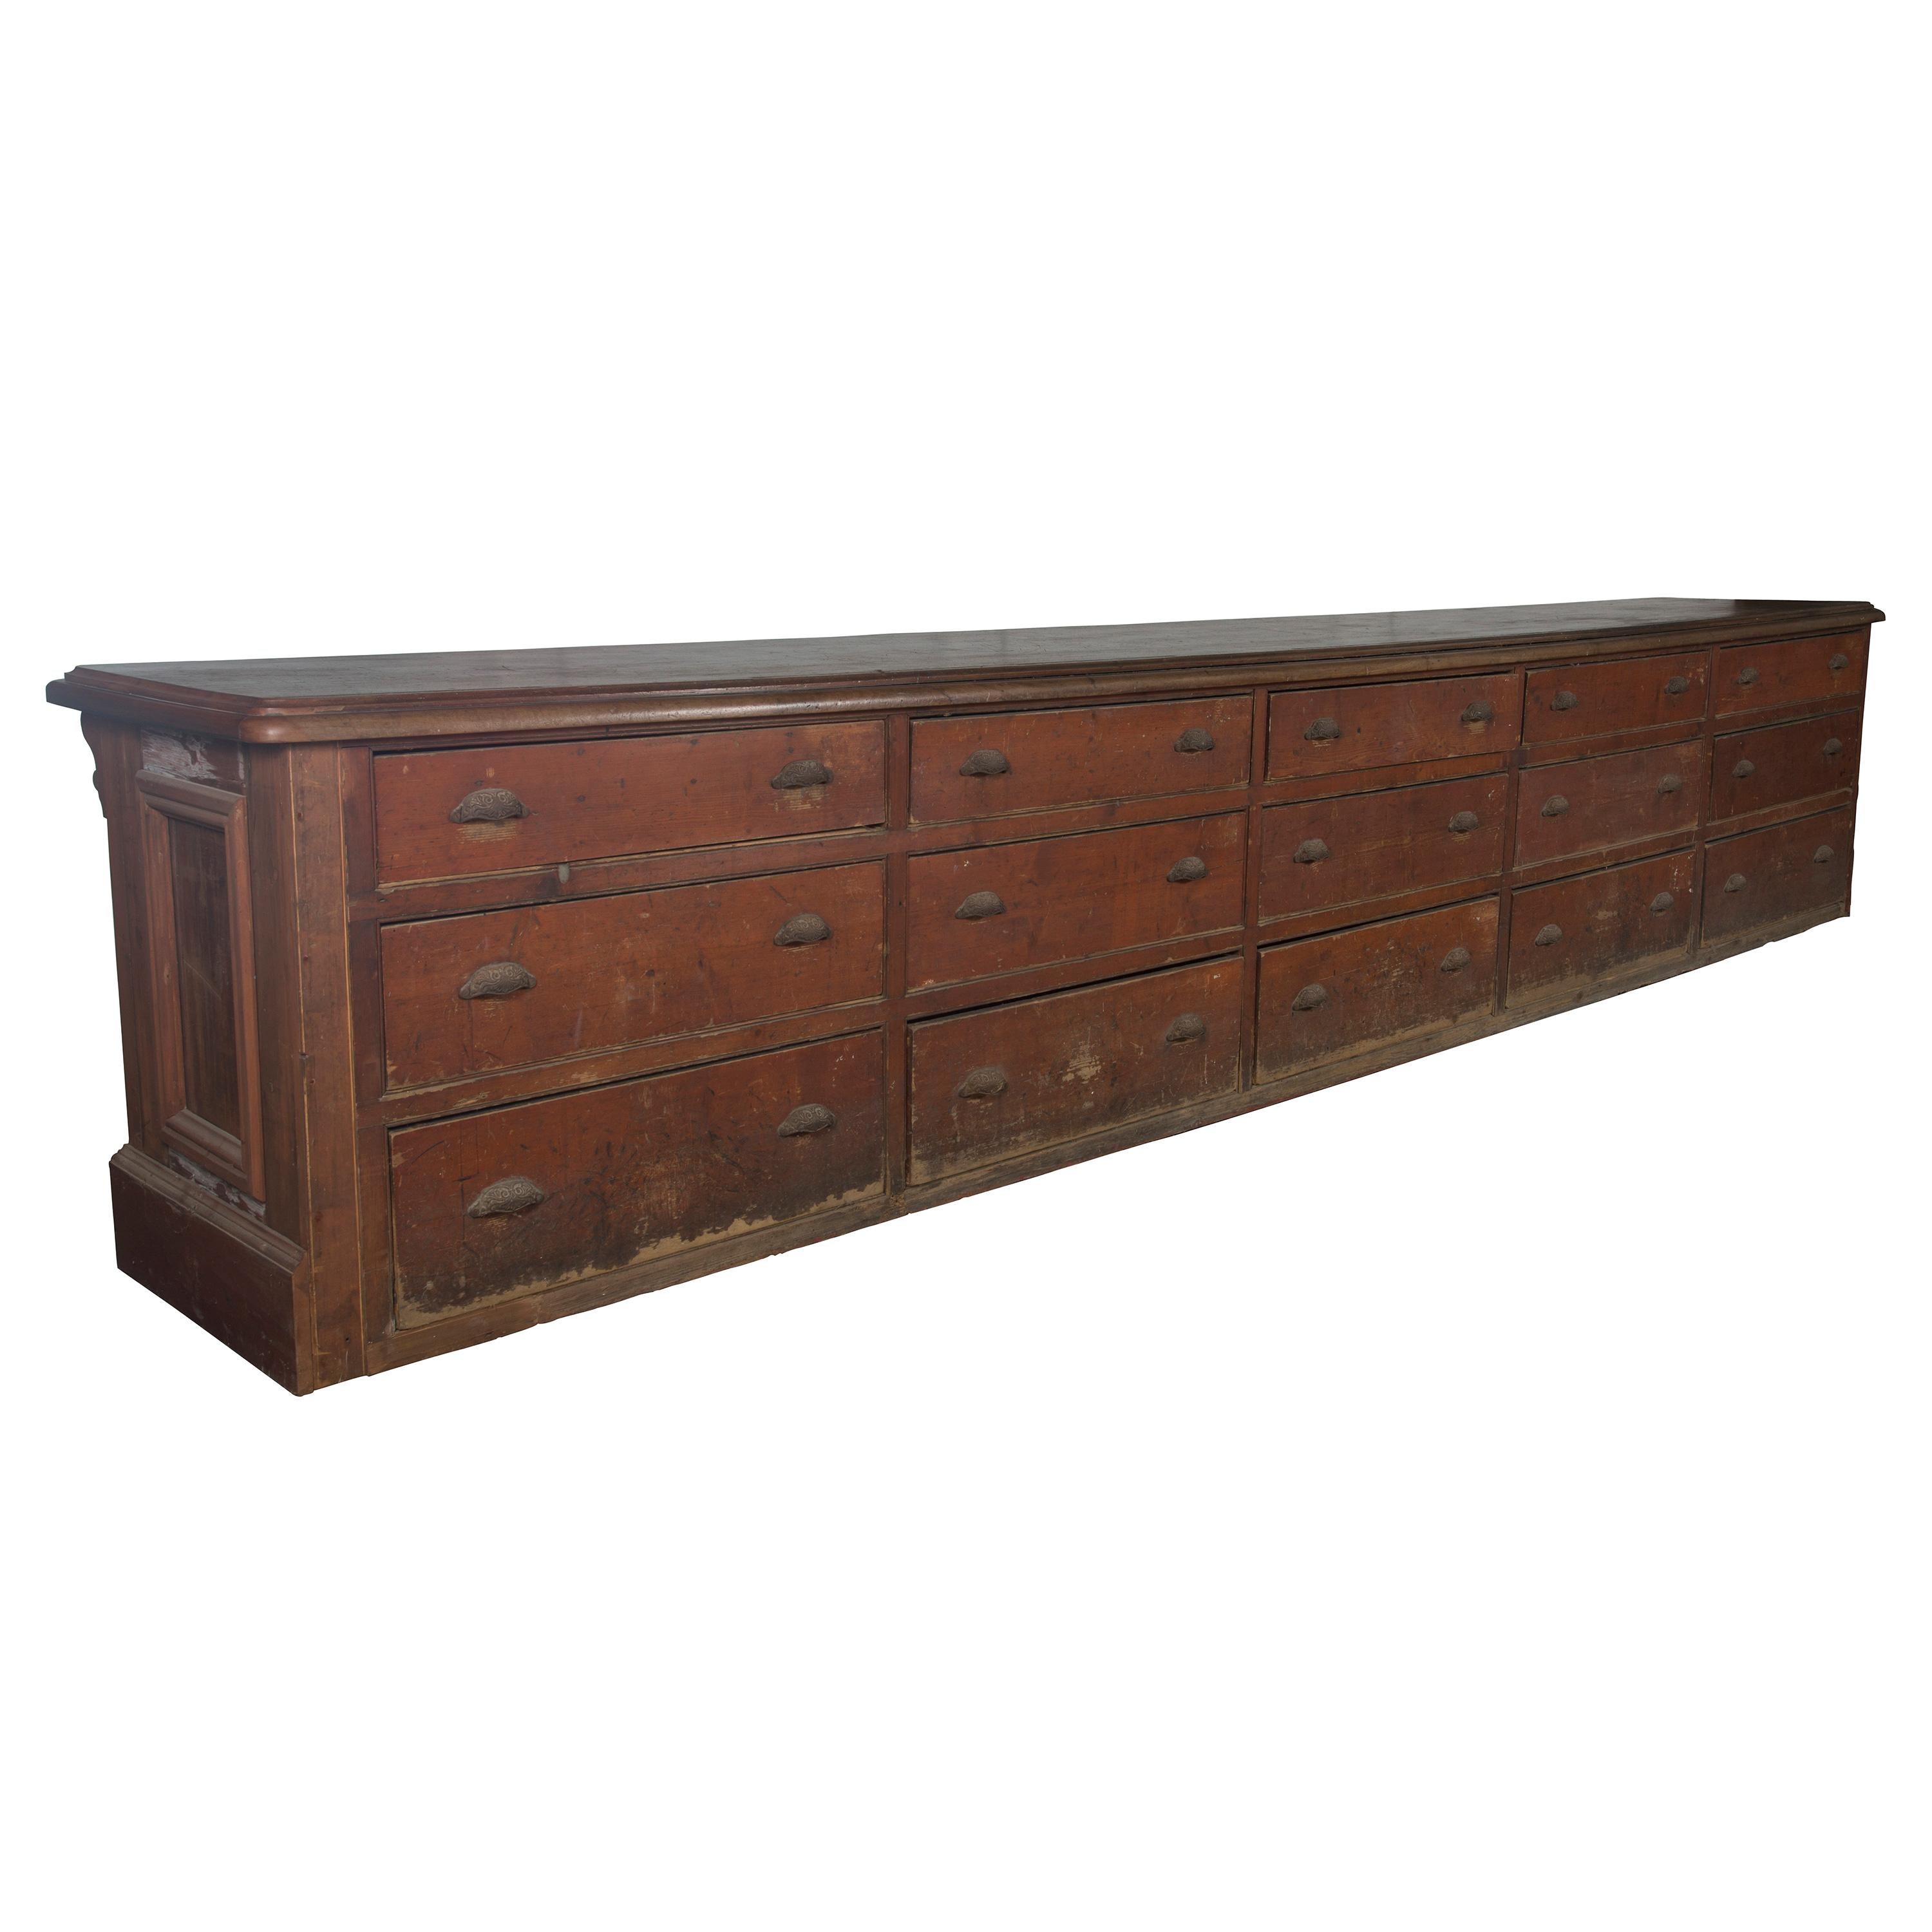 A monumental, fifteen foot long, free standing 19th century, original painted pine shop counter. A single plank mahogany top and fifteen large drawers. This counter originated from a haberdashery in Liverpool.

In very good condition, with some